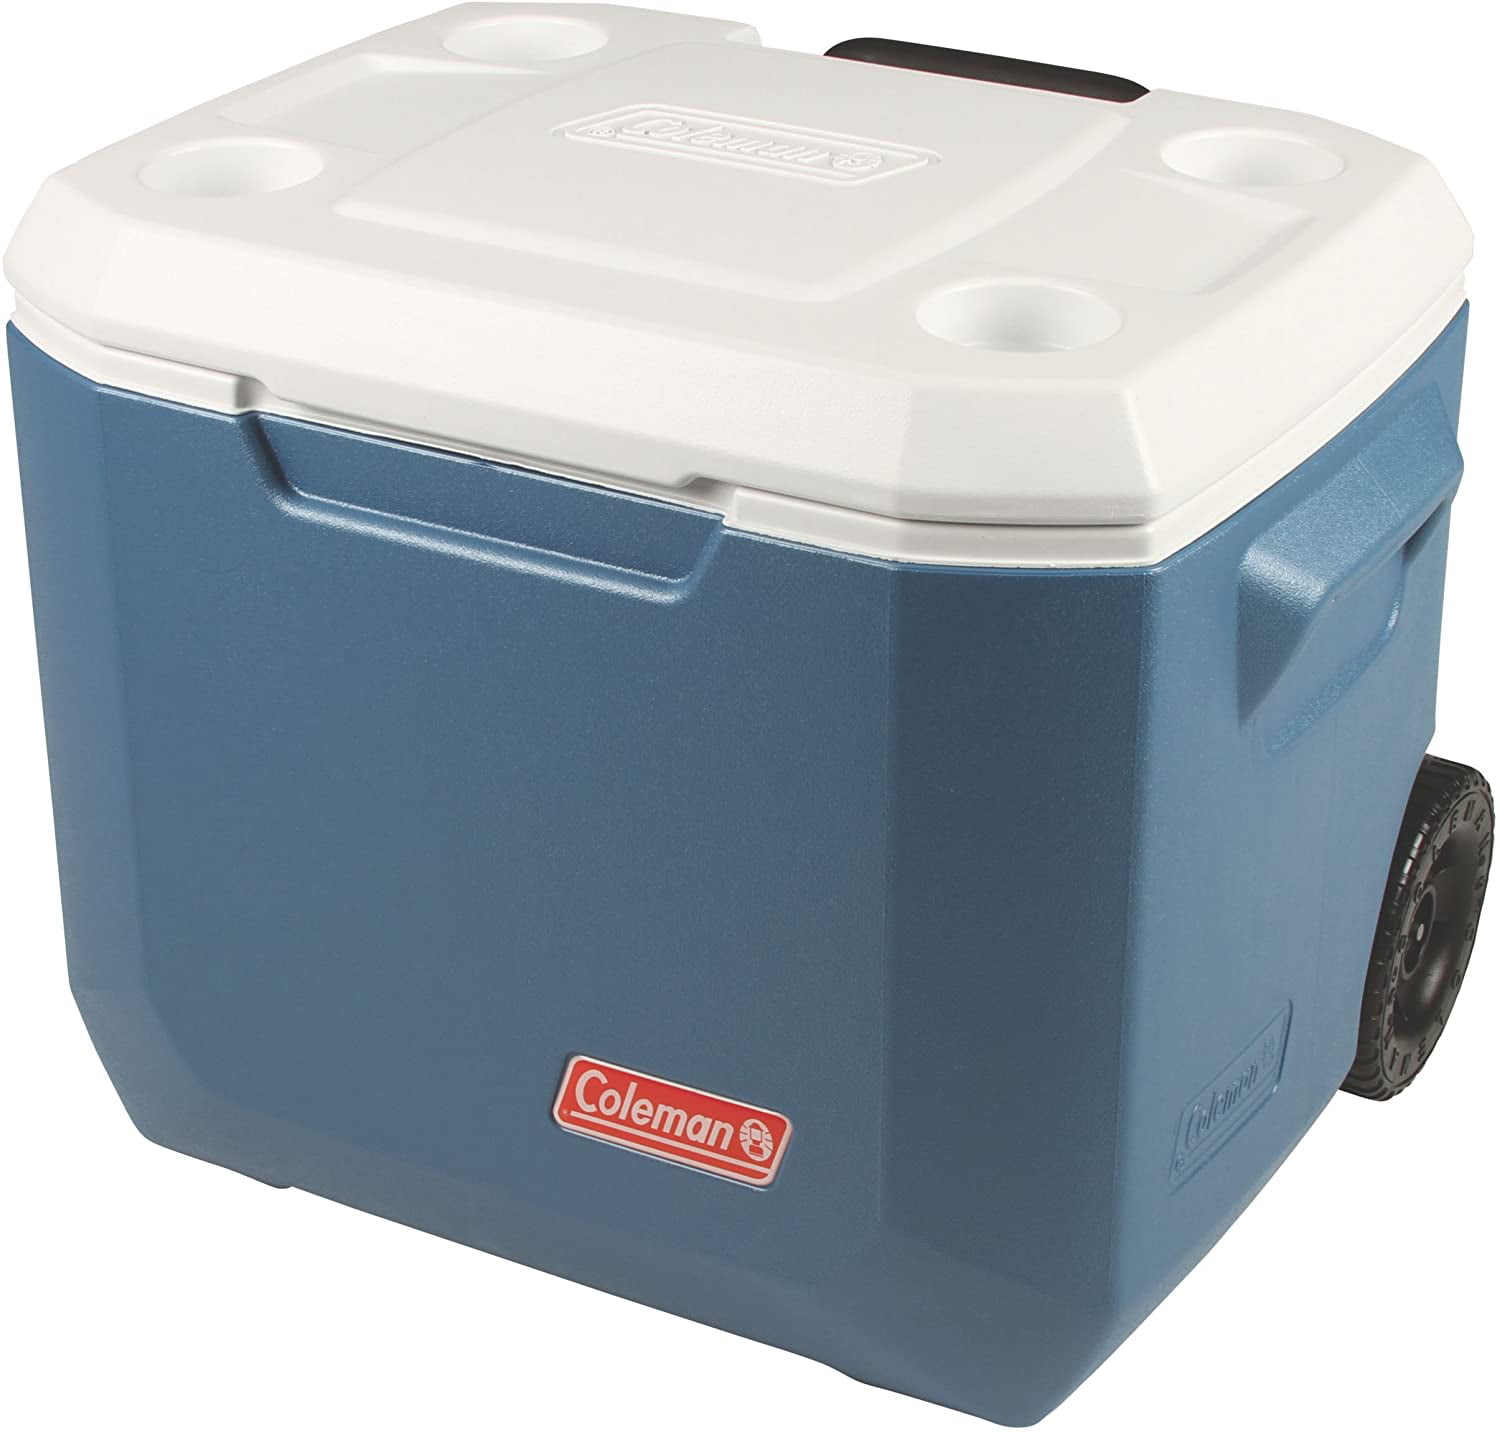 Xtreme Wheeled Cooler Coleman Portable Cooler with Wheels 50-Quart 